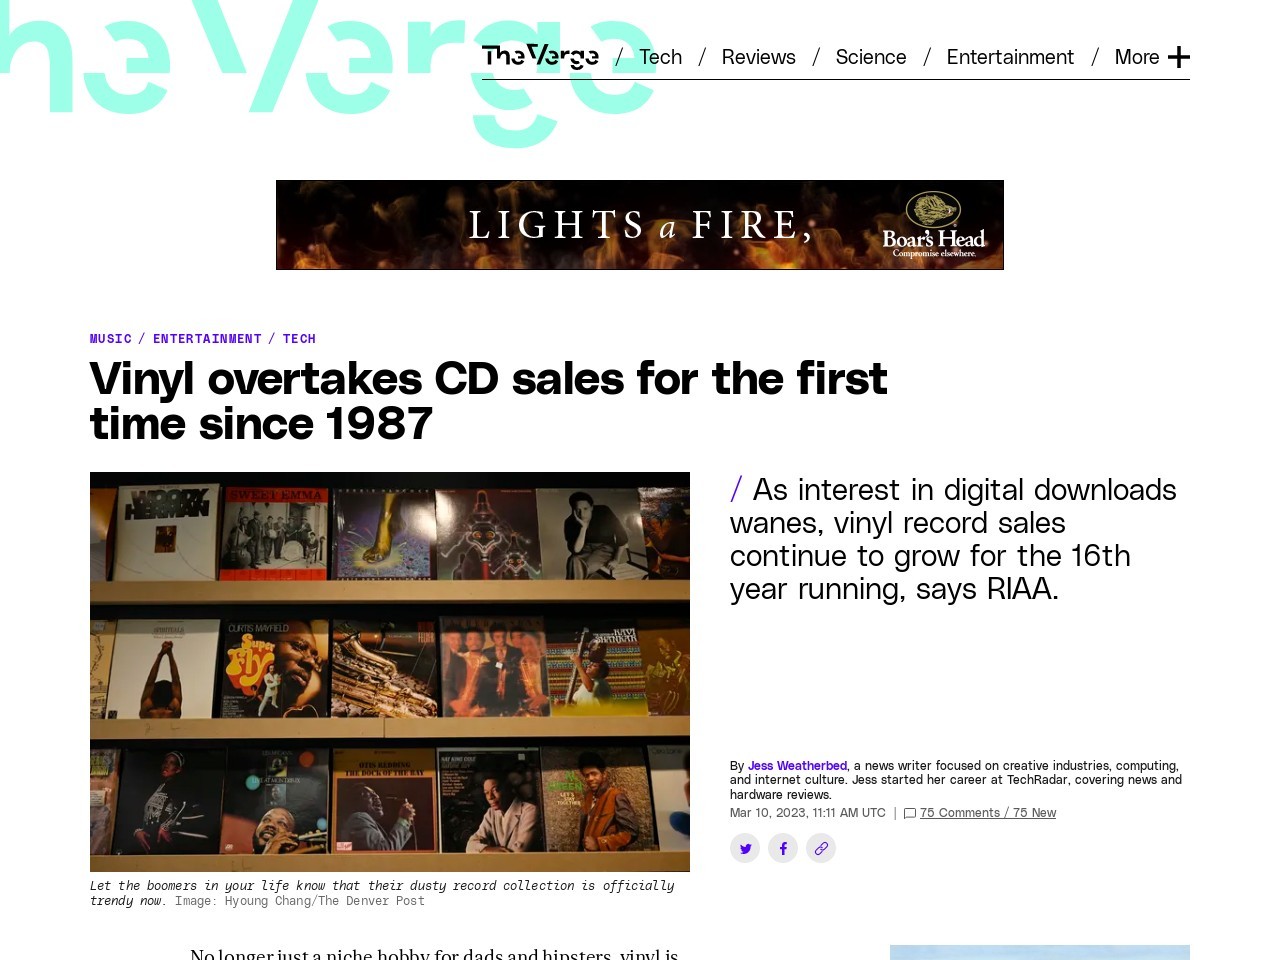 Vinyl overtakes CD sales for the first time since 1987 - The Verge